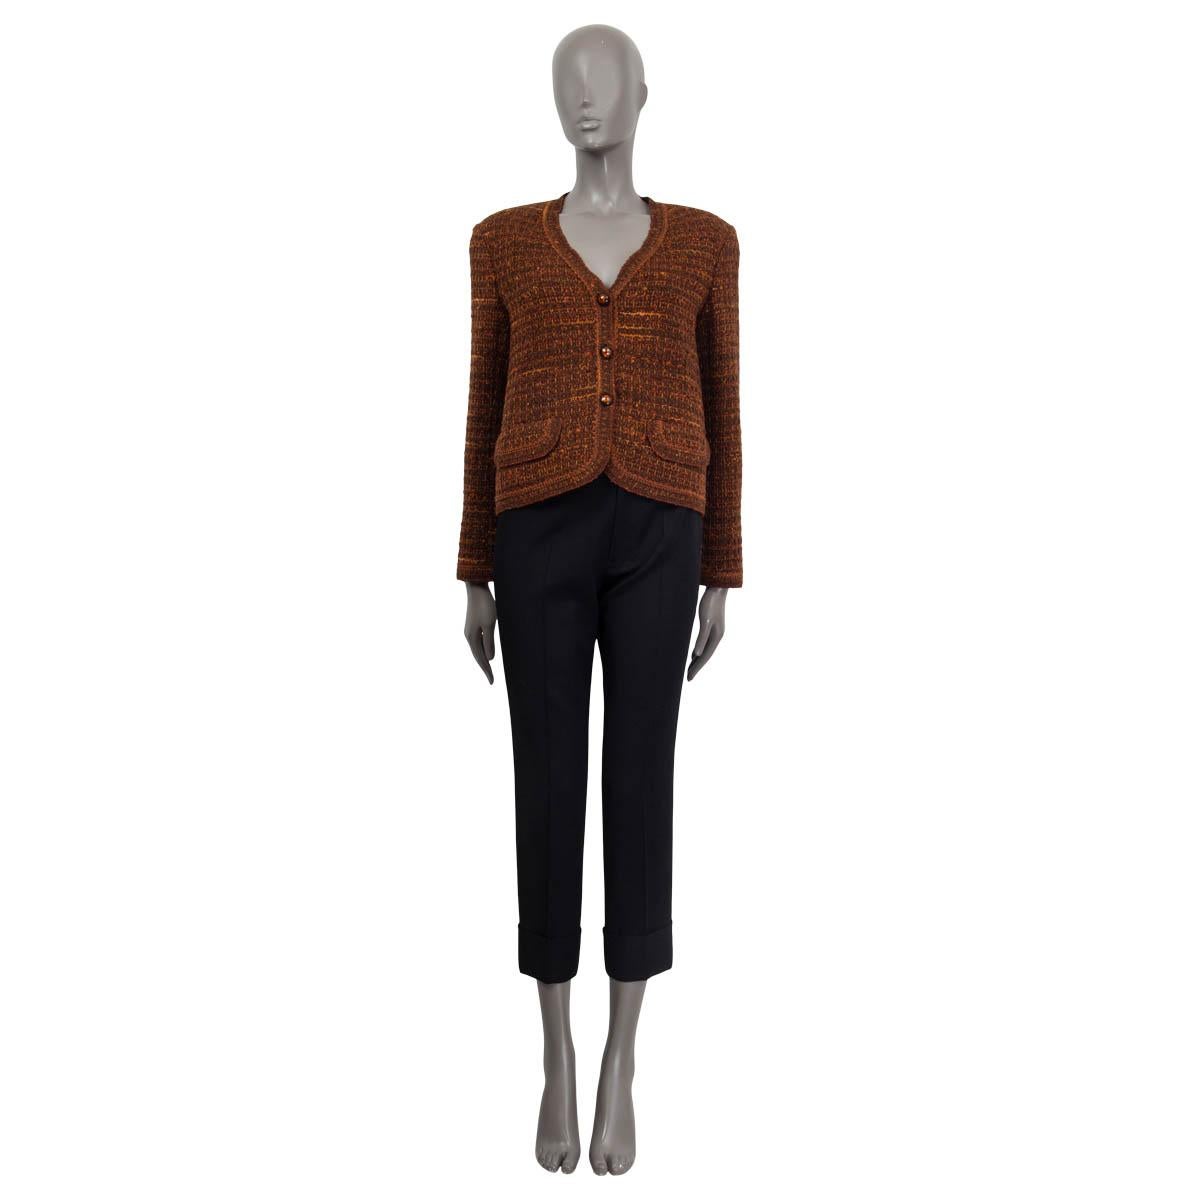 100% authentic Chanel Fall/Winter 1998 v-neck blazer in brown and orange wool (95%) and acrylic (5%). Features padded shoulders, two flap pockets on the front and buttoned cuffs. Opens with three buttons on the front. Sleeves lined in brown silk